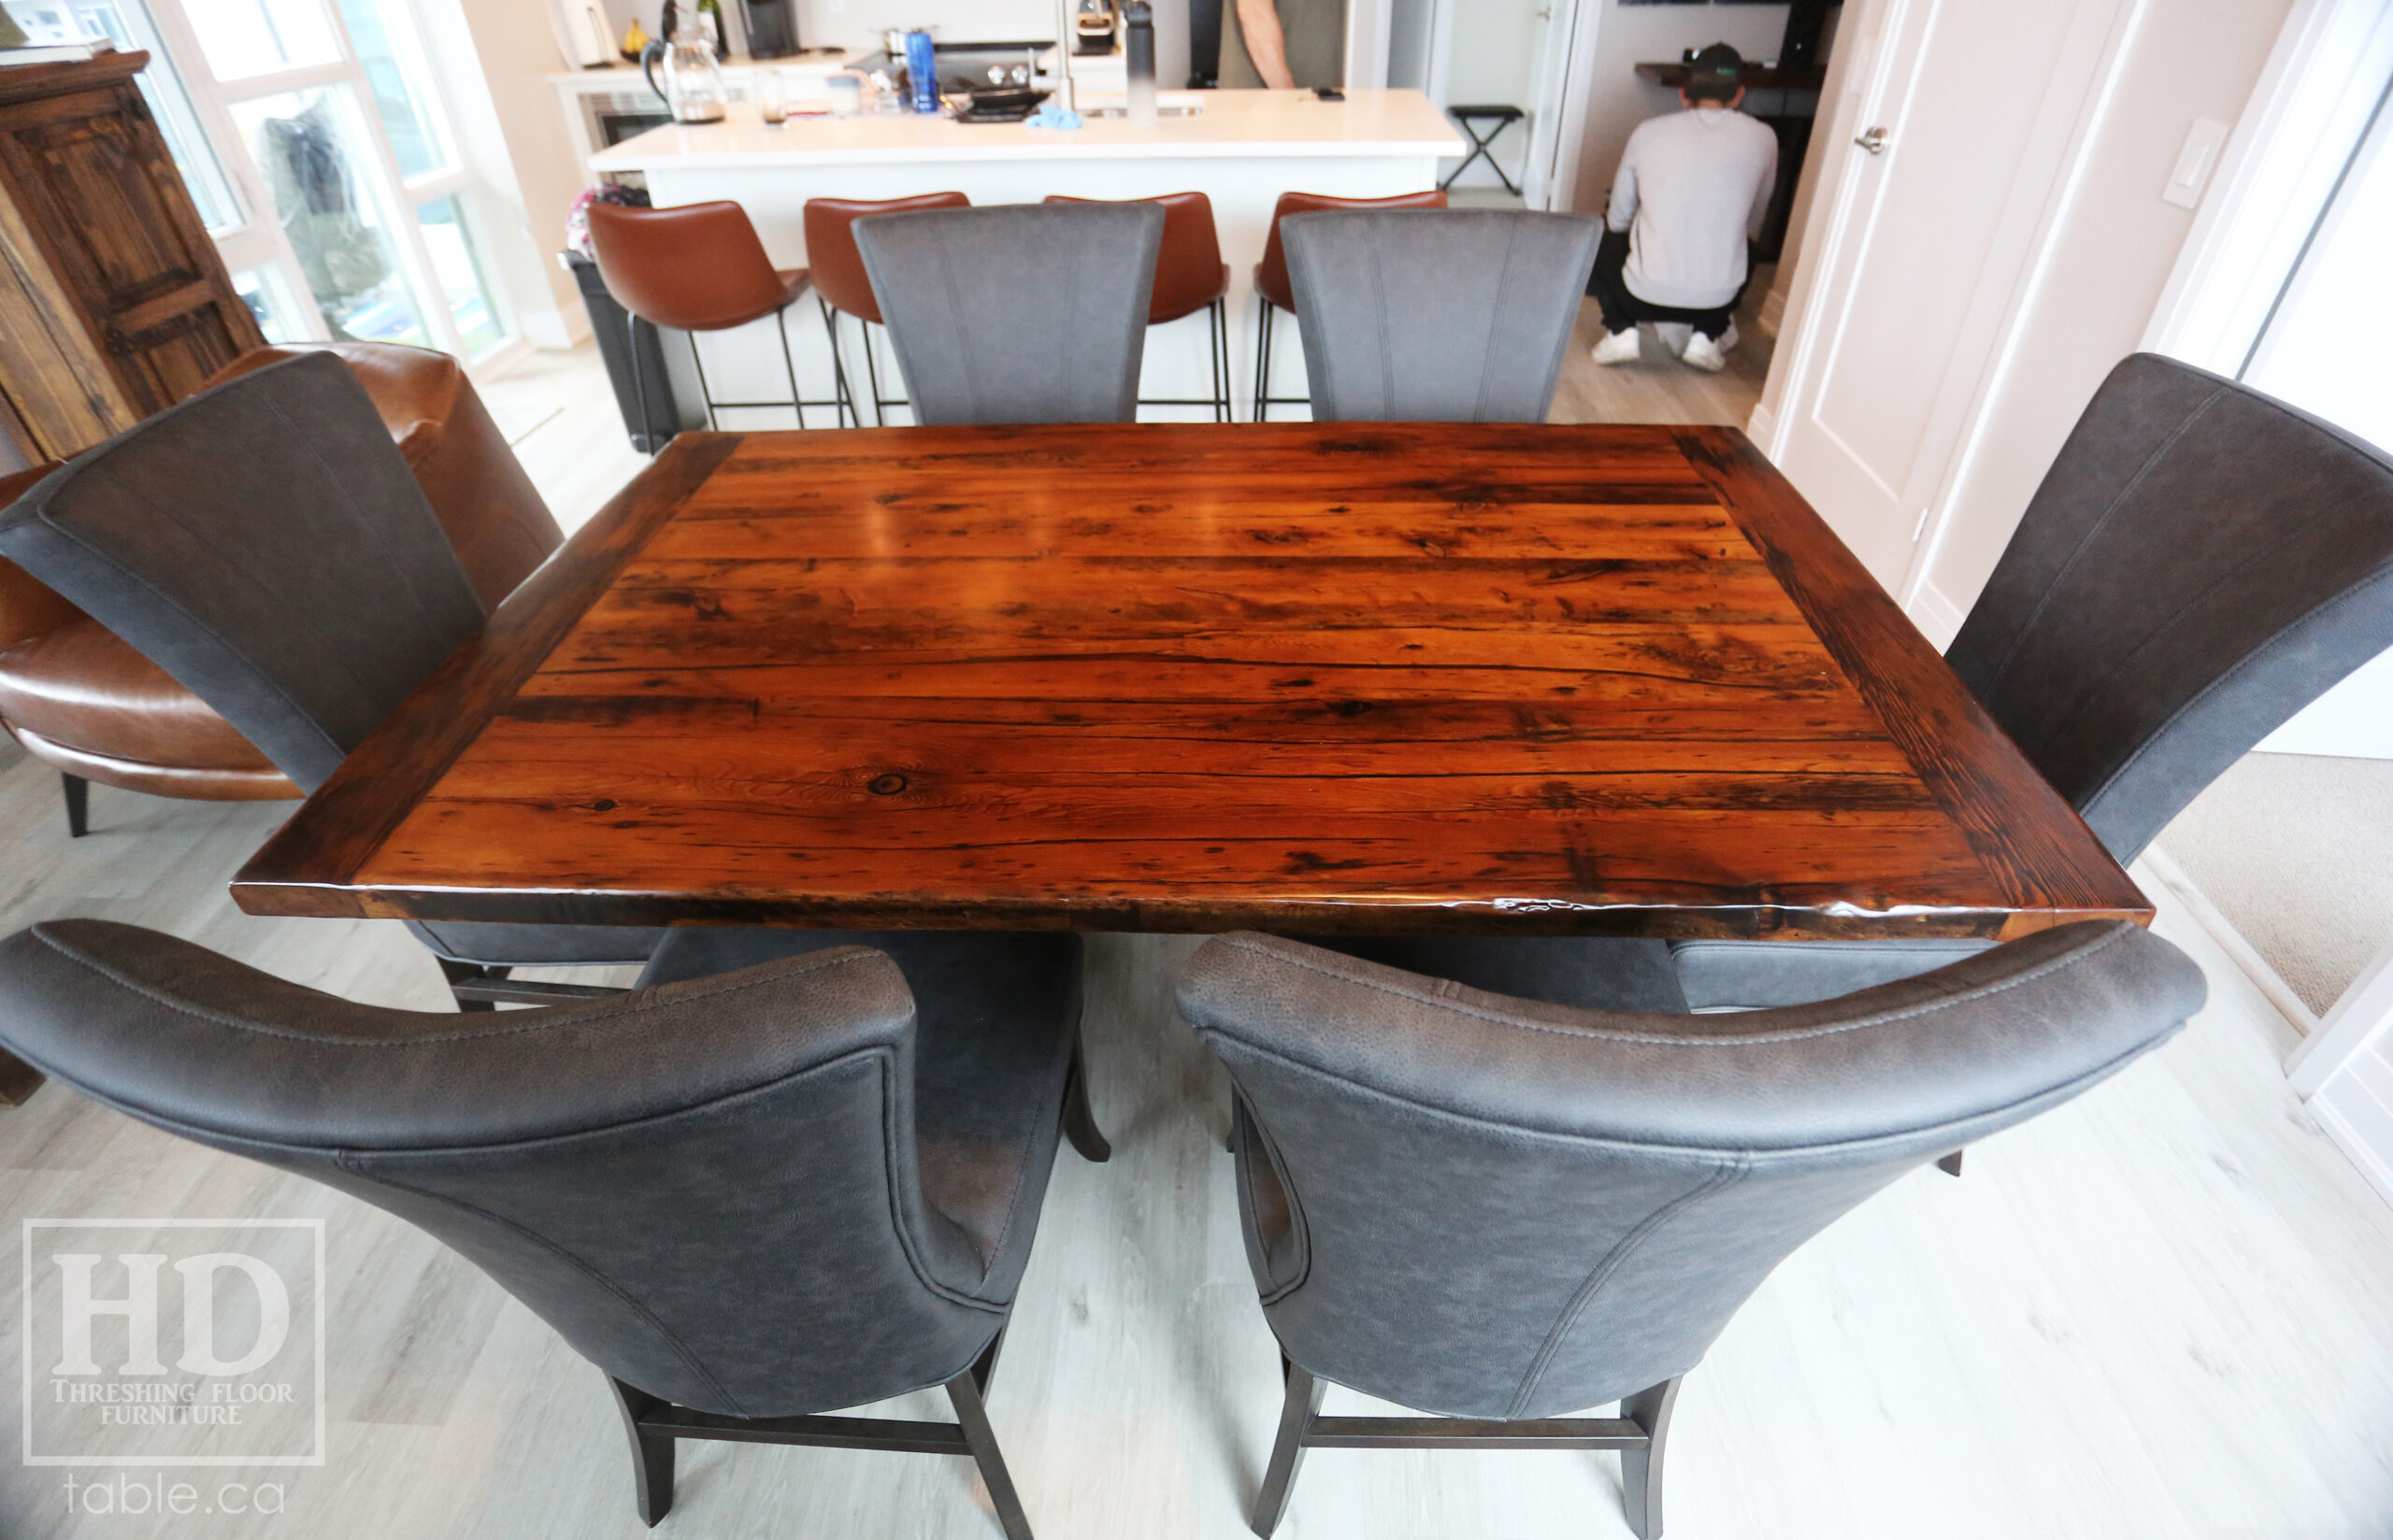 5 1/2' Ontario Barnwood Table we made for a Grimsby, Ontario home - 42" wide - Trestle Base - Old Growth Hemlock Threshing Floor Construction - Original edges & distressing maintained - Premium epoxy + satin polyurethane finish - www.table.ca